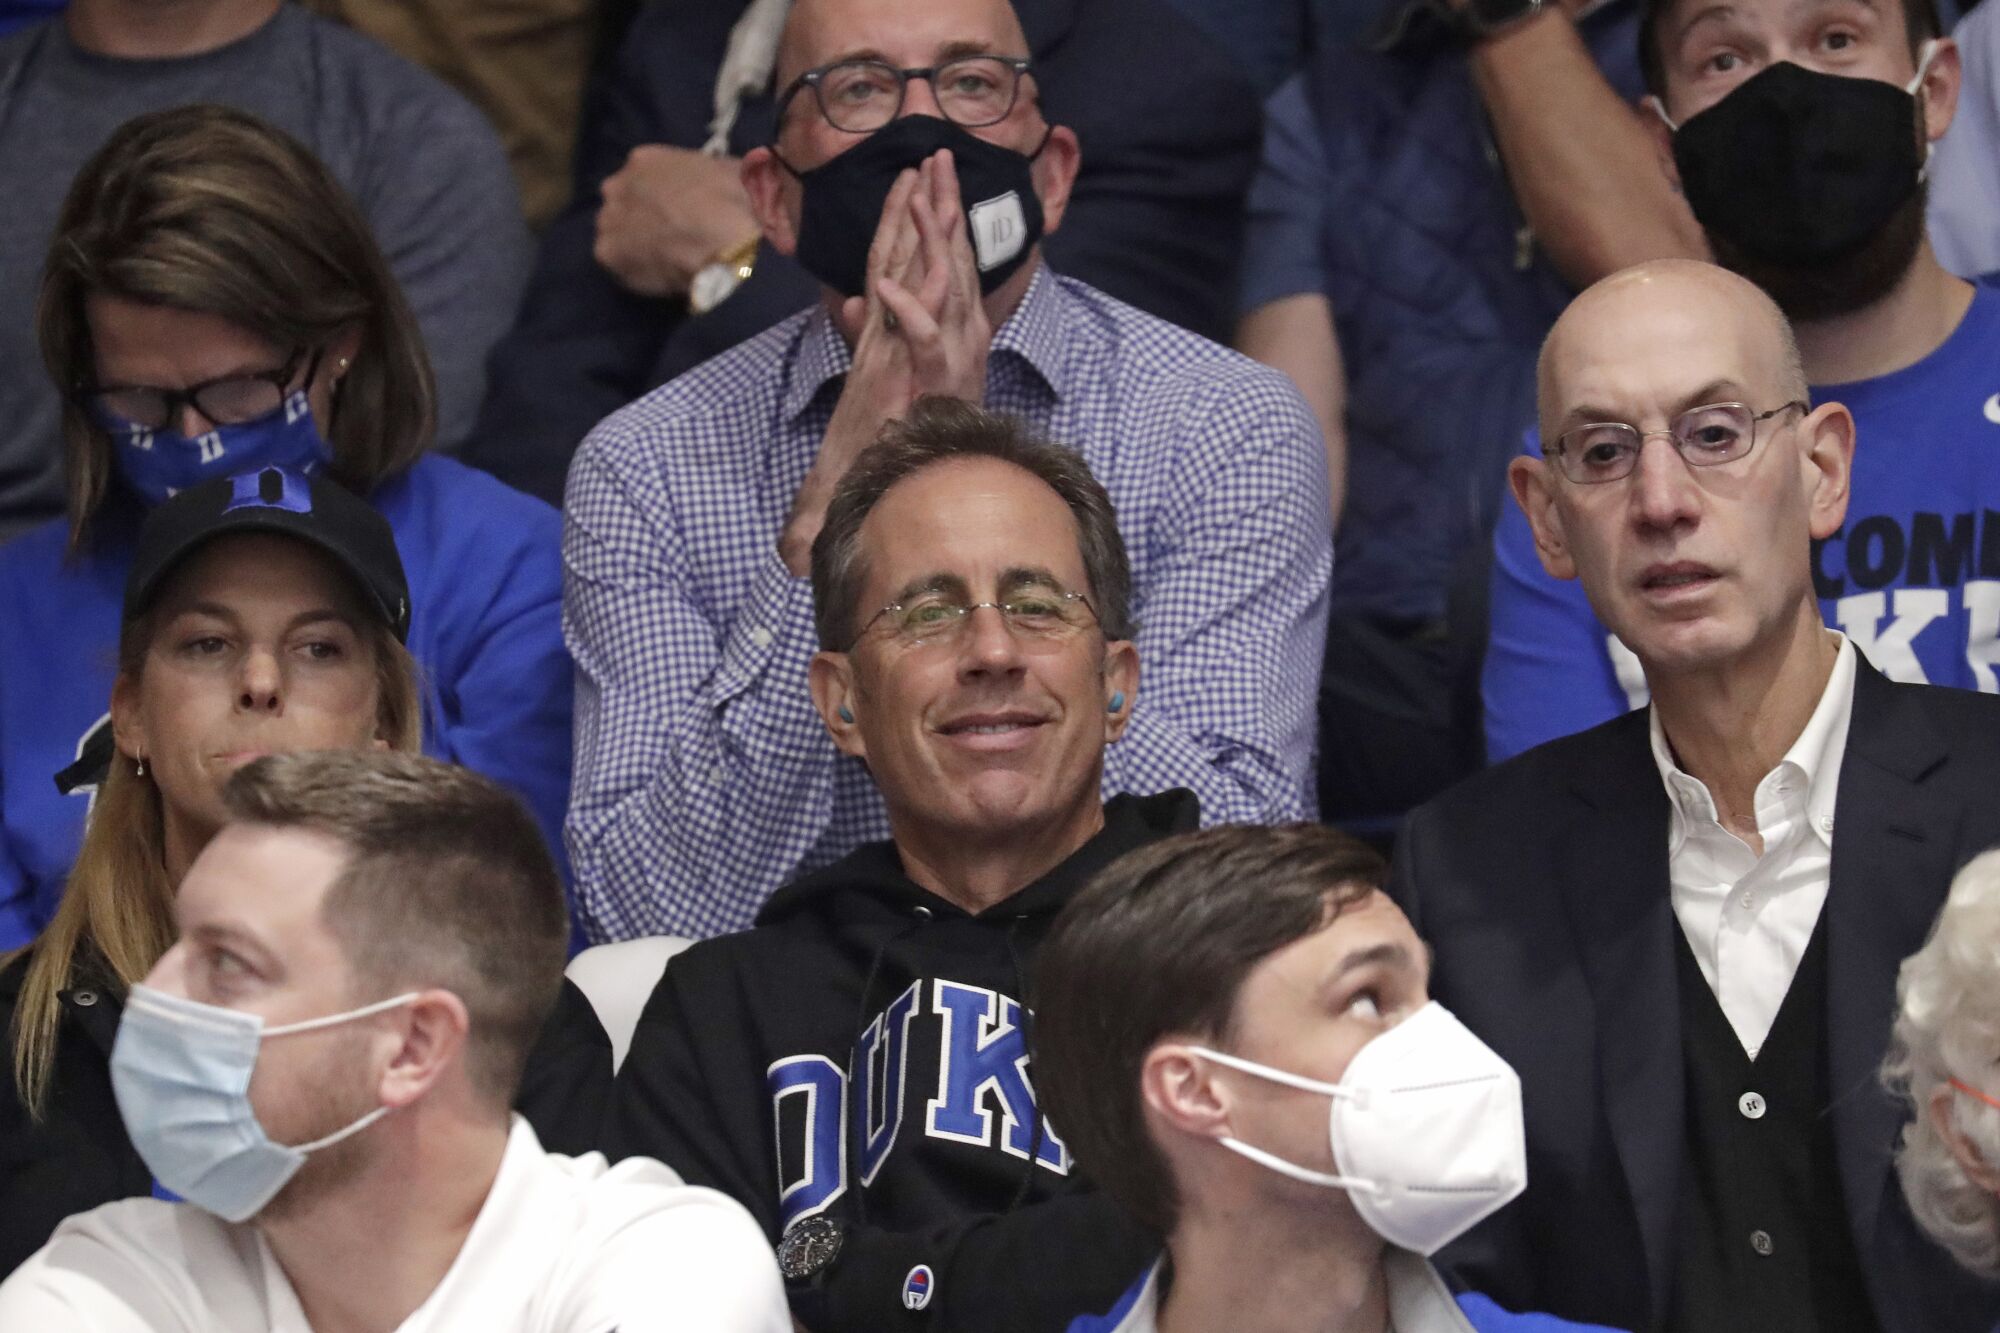 Actor and comedian Jerry Seinfeld sits next to NBA Commissioner Adam Silver.